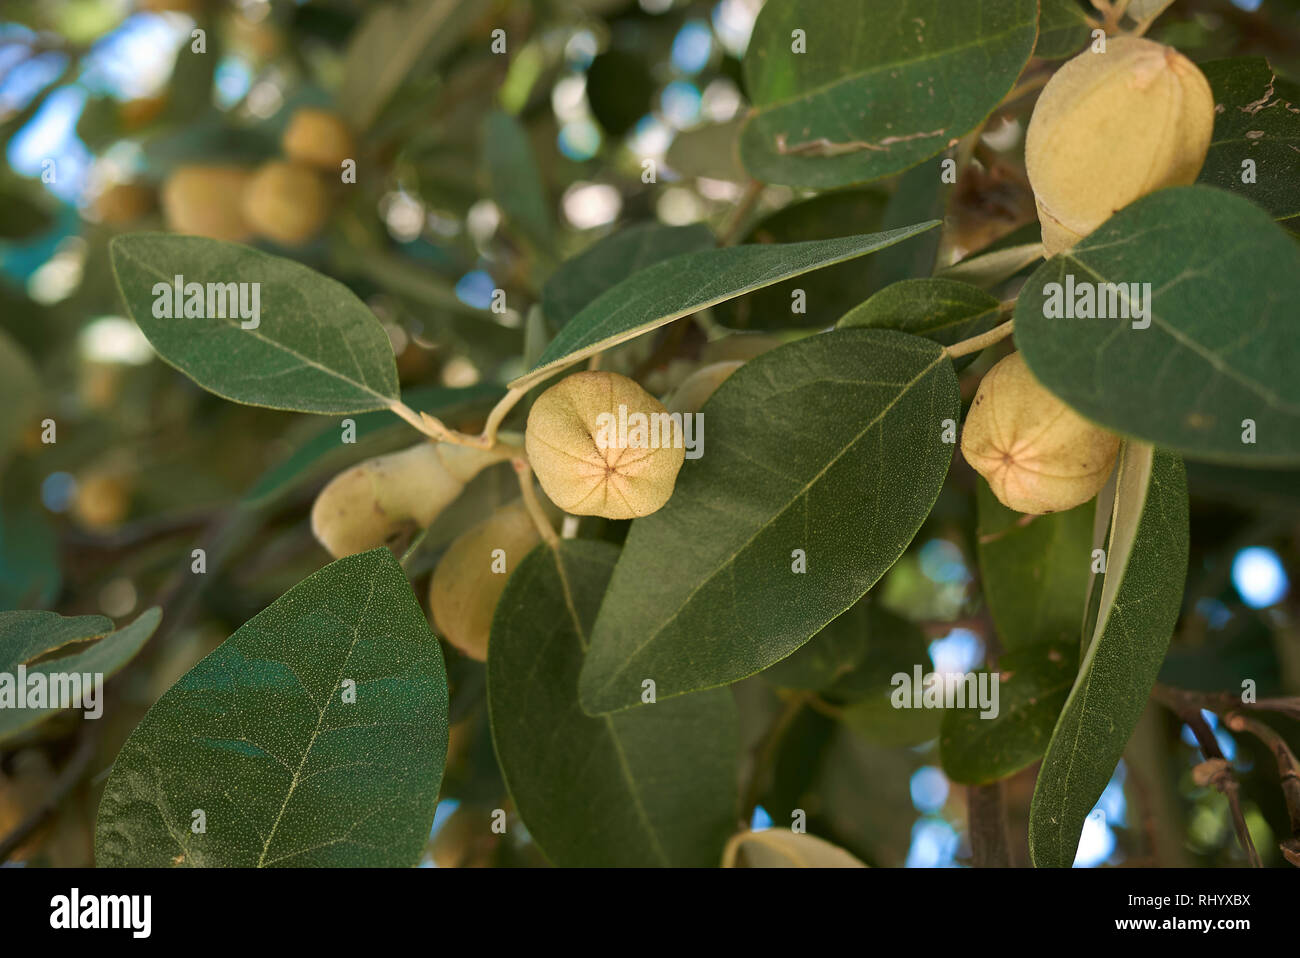 Lagunaria patersonia branch with fruit Stock Photo